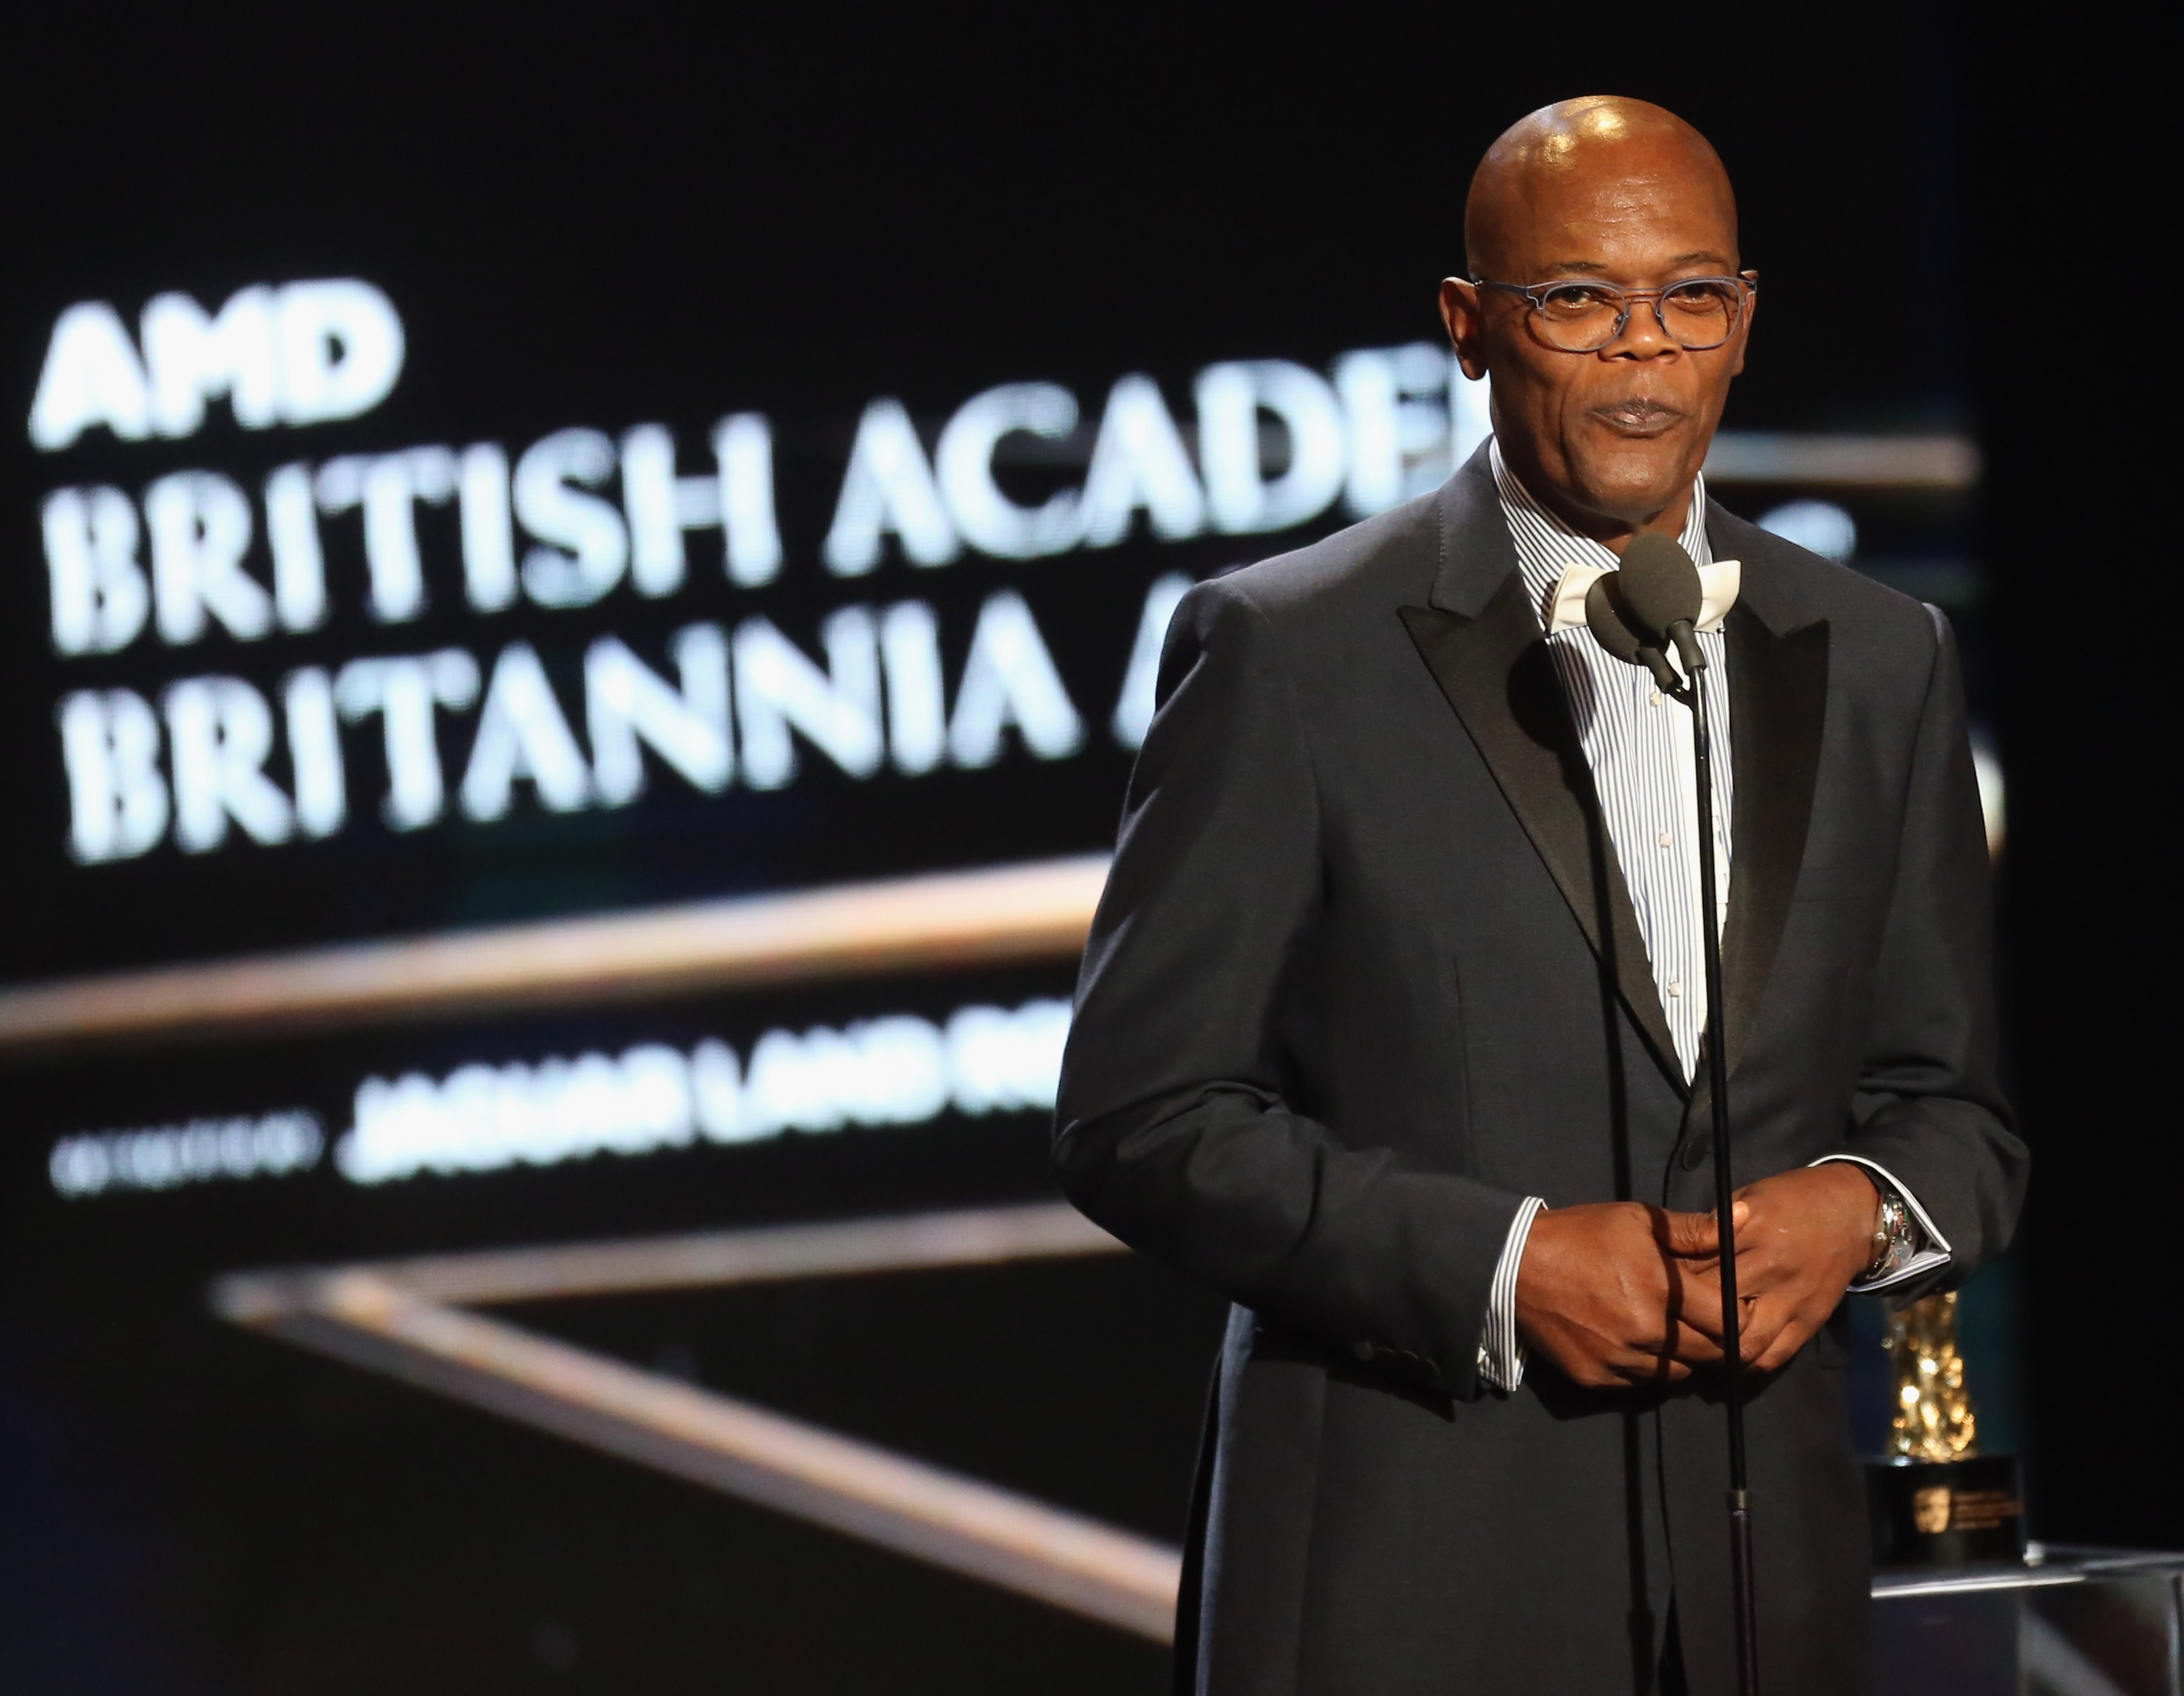 BEVERLY HILLS, CA - OCTOBER 28: Honoree Samuel L. Jackson accepts the Albert R. Broccoli Britannia Award for Worldwide Contribution to Entertainment onstage during the 2016 AMD British Academy Britannia Awards presented by Jaguar Land Rover and American Airlines at The Beverly Hilton Hotel on October 28, 2016 in Beverly Hills, California.   Frederick M. Brown/Getty Images/AFP